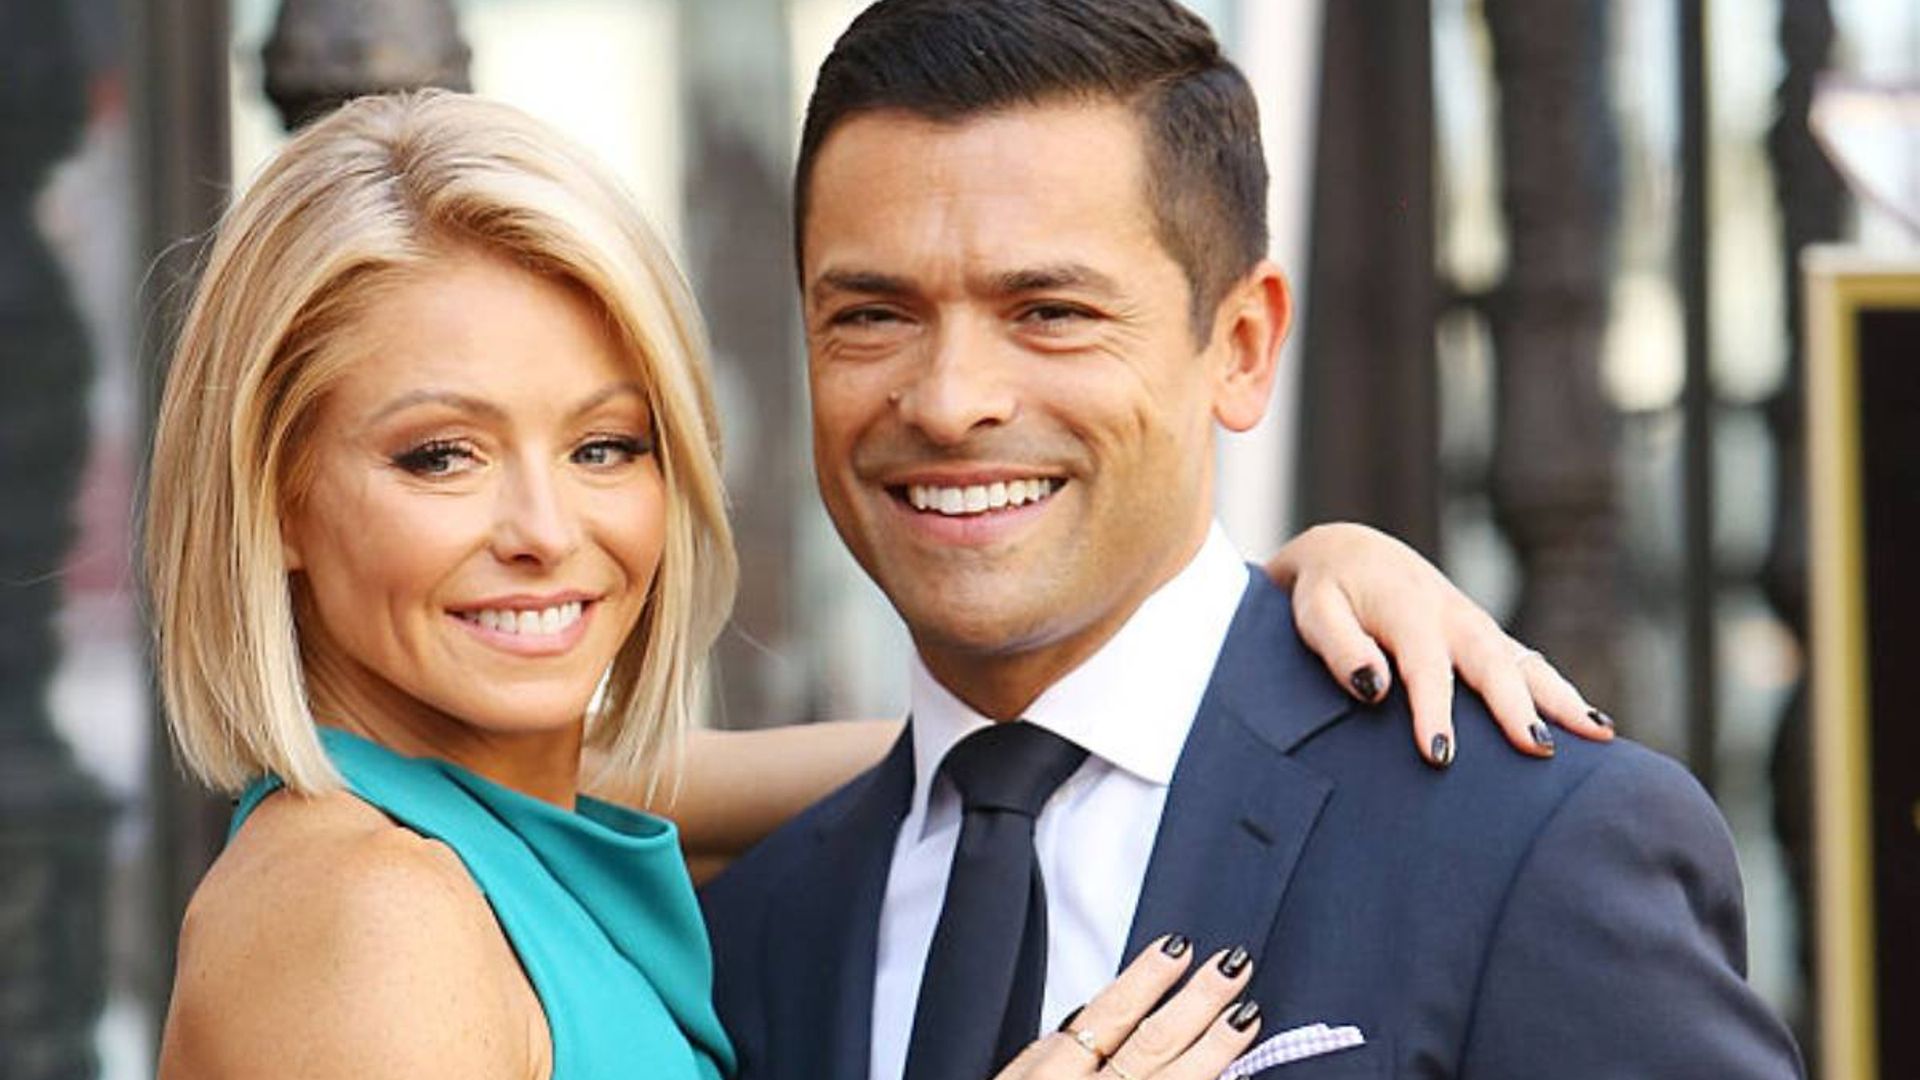 Kelly Ripa's lookalike daughter steals the spotlight in sweet family photo